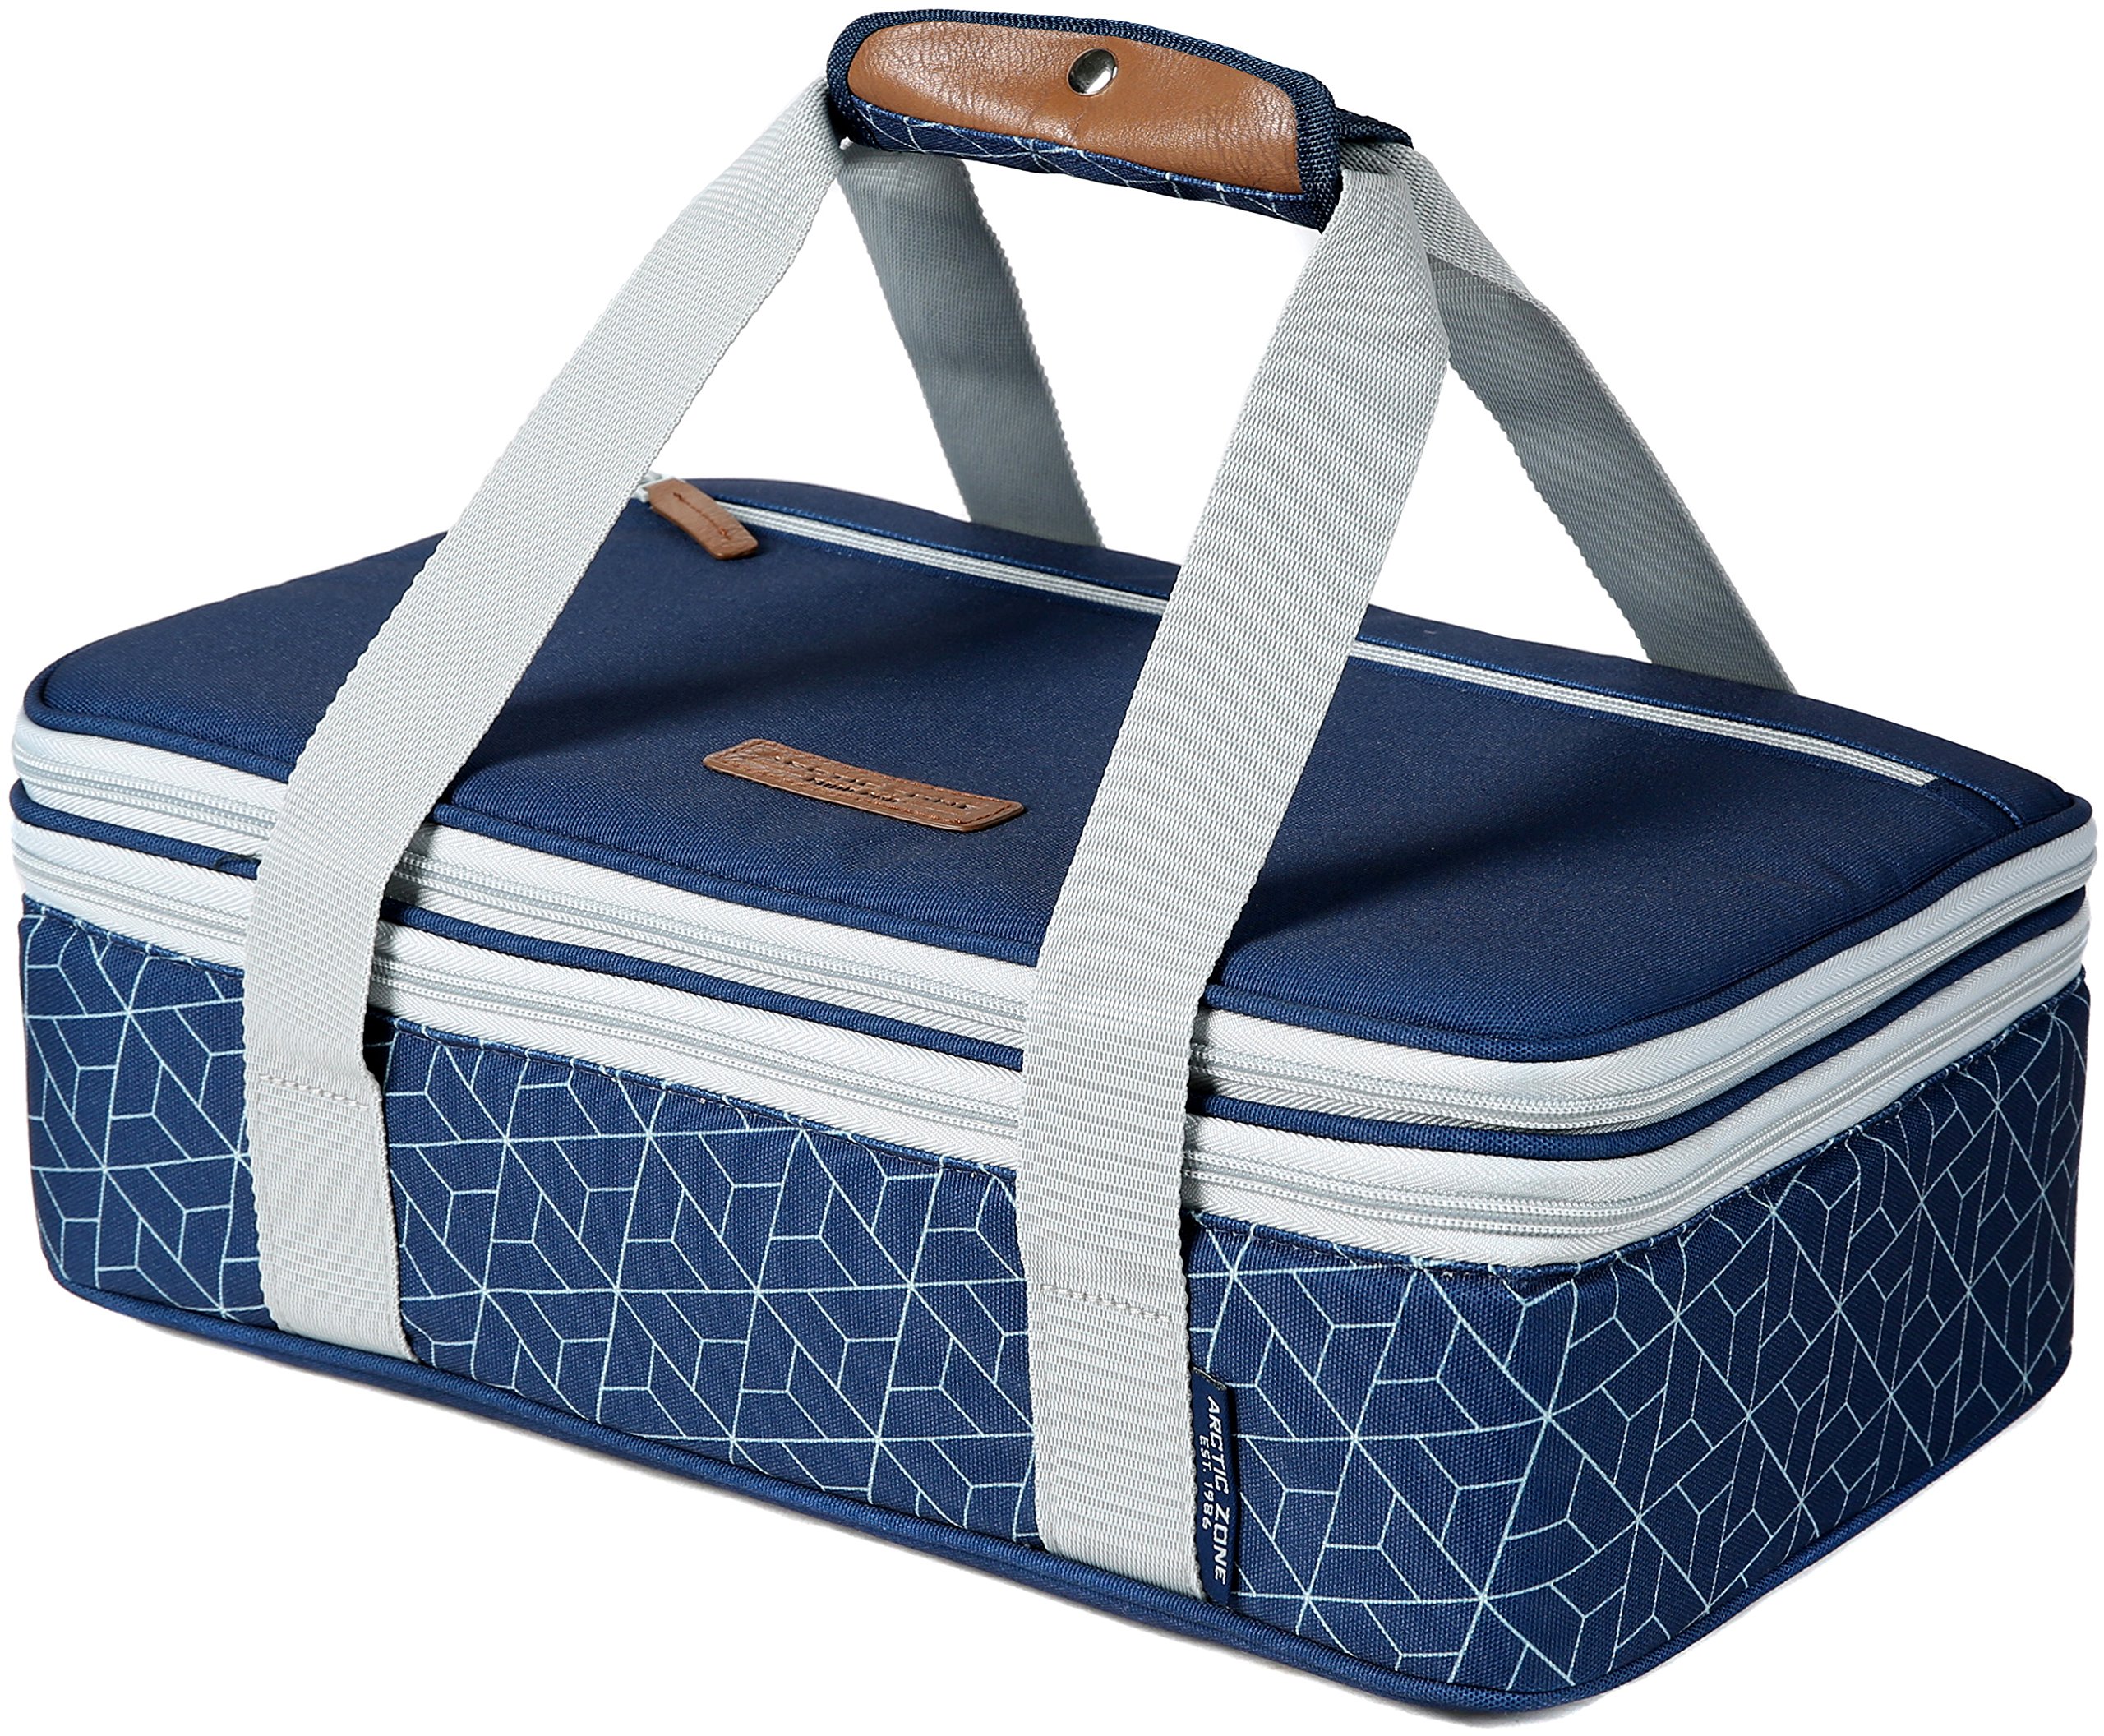 Arctic Zone Hot/Cold Insulated Food and Casserole Carrier, Large, Navy